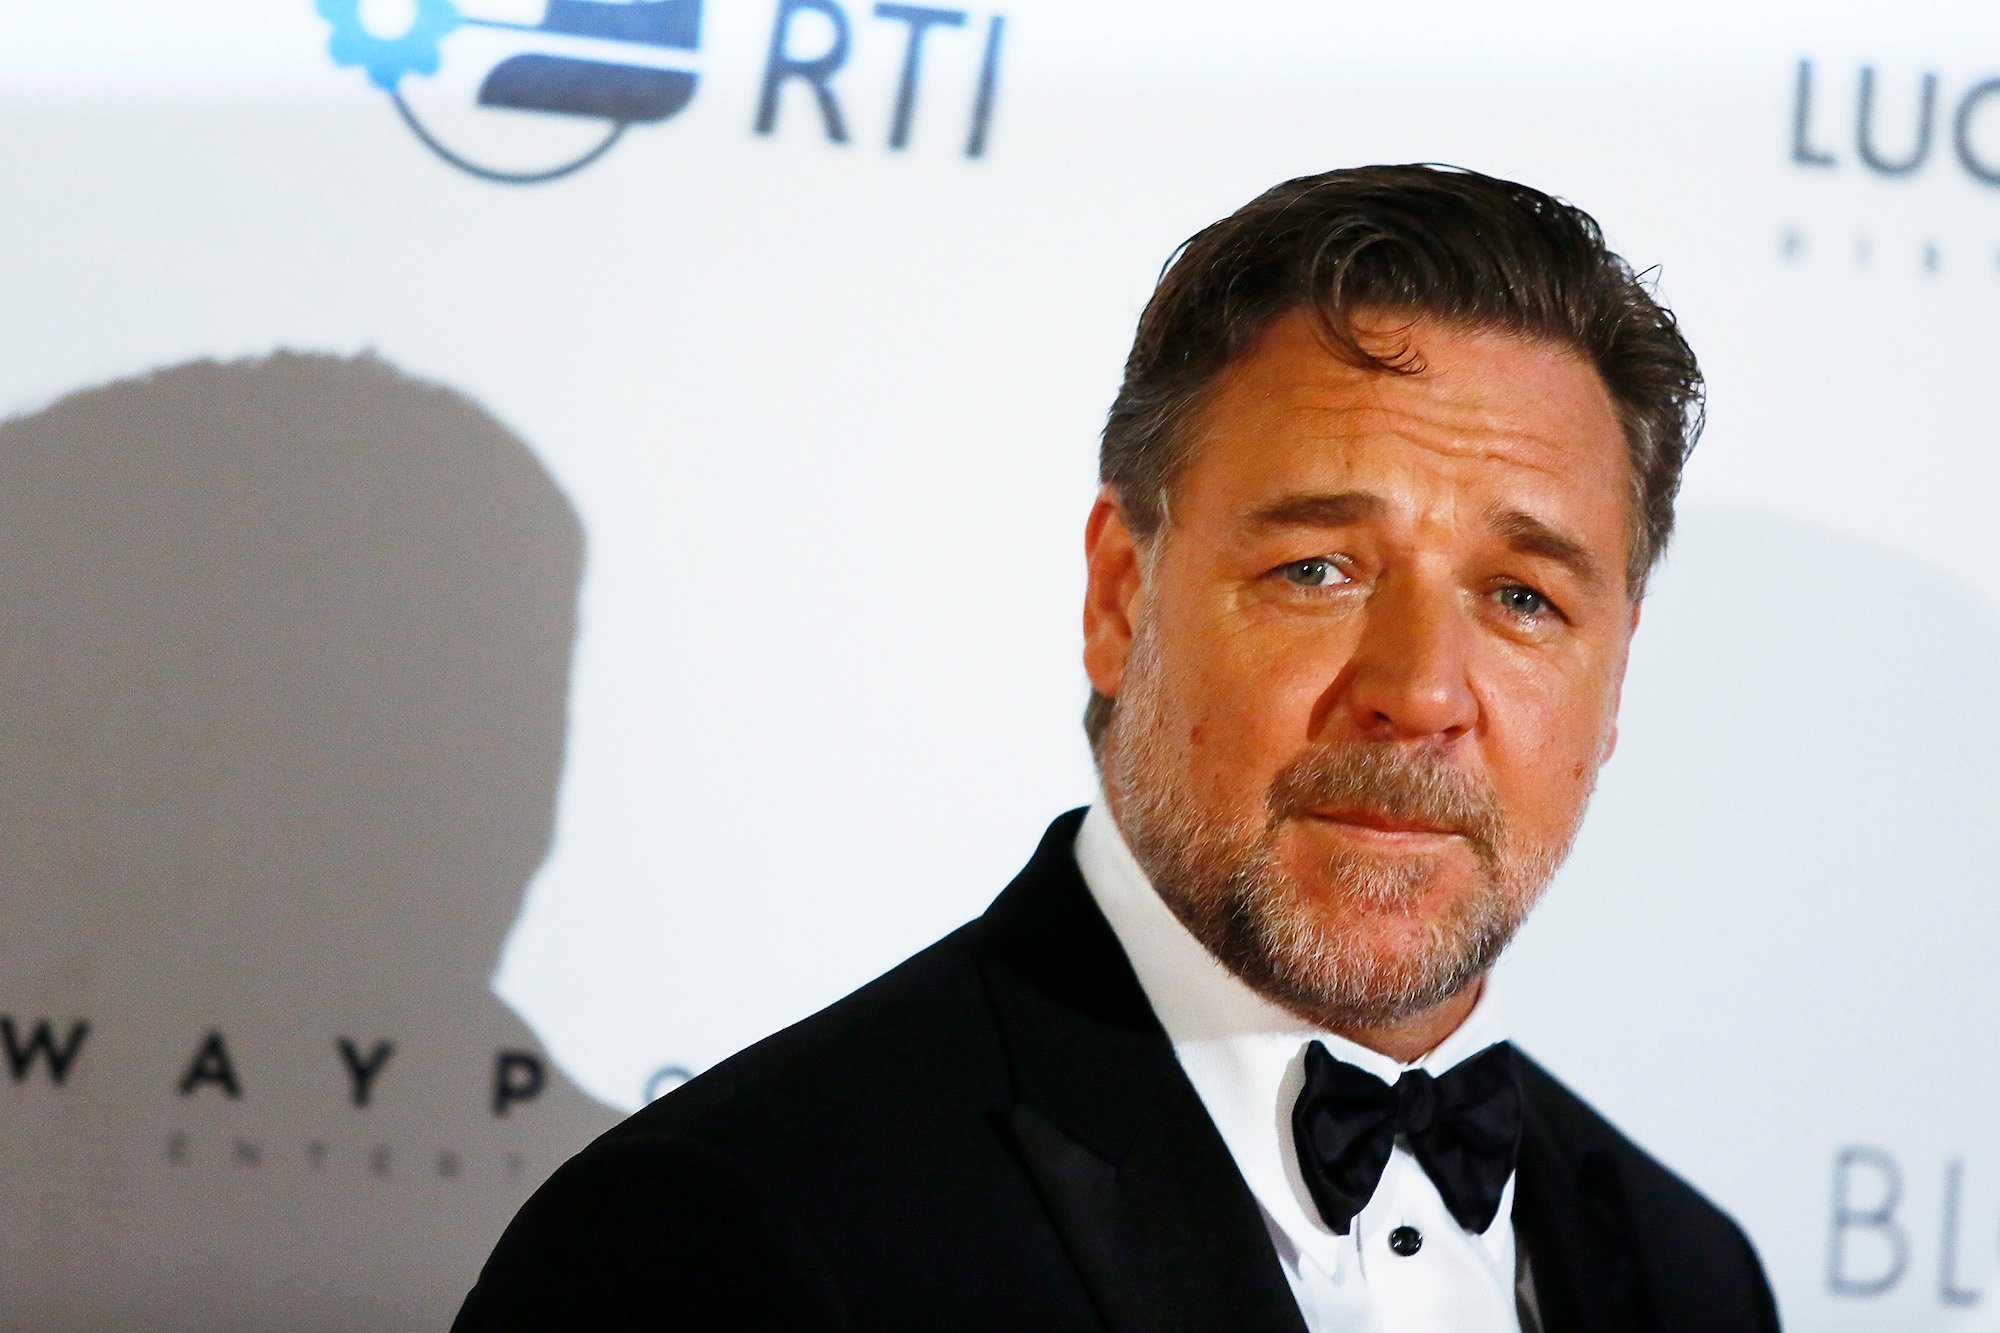 Russell Crowe’s Short Temper Once Landed Him With a Felony Charge